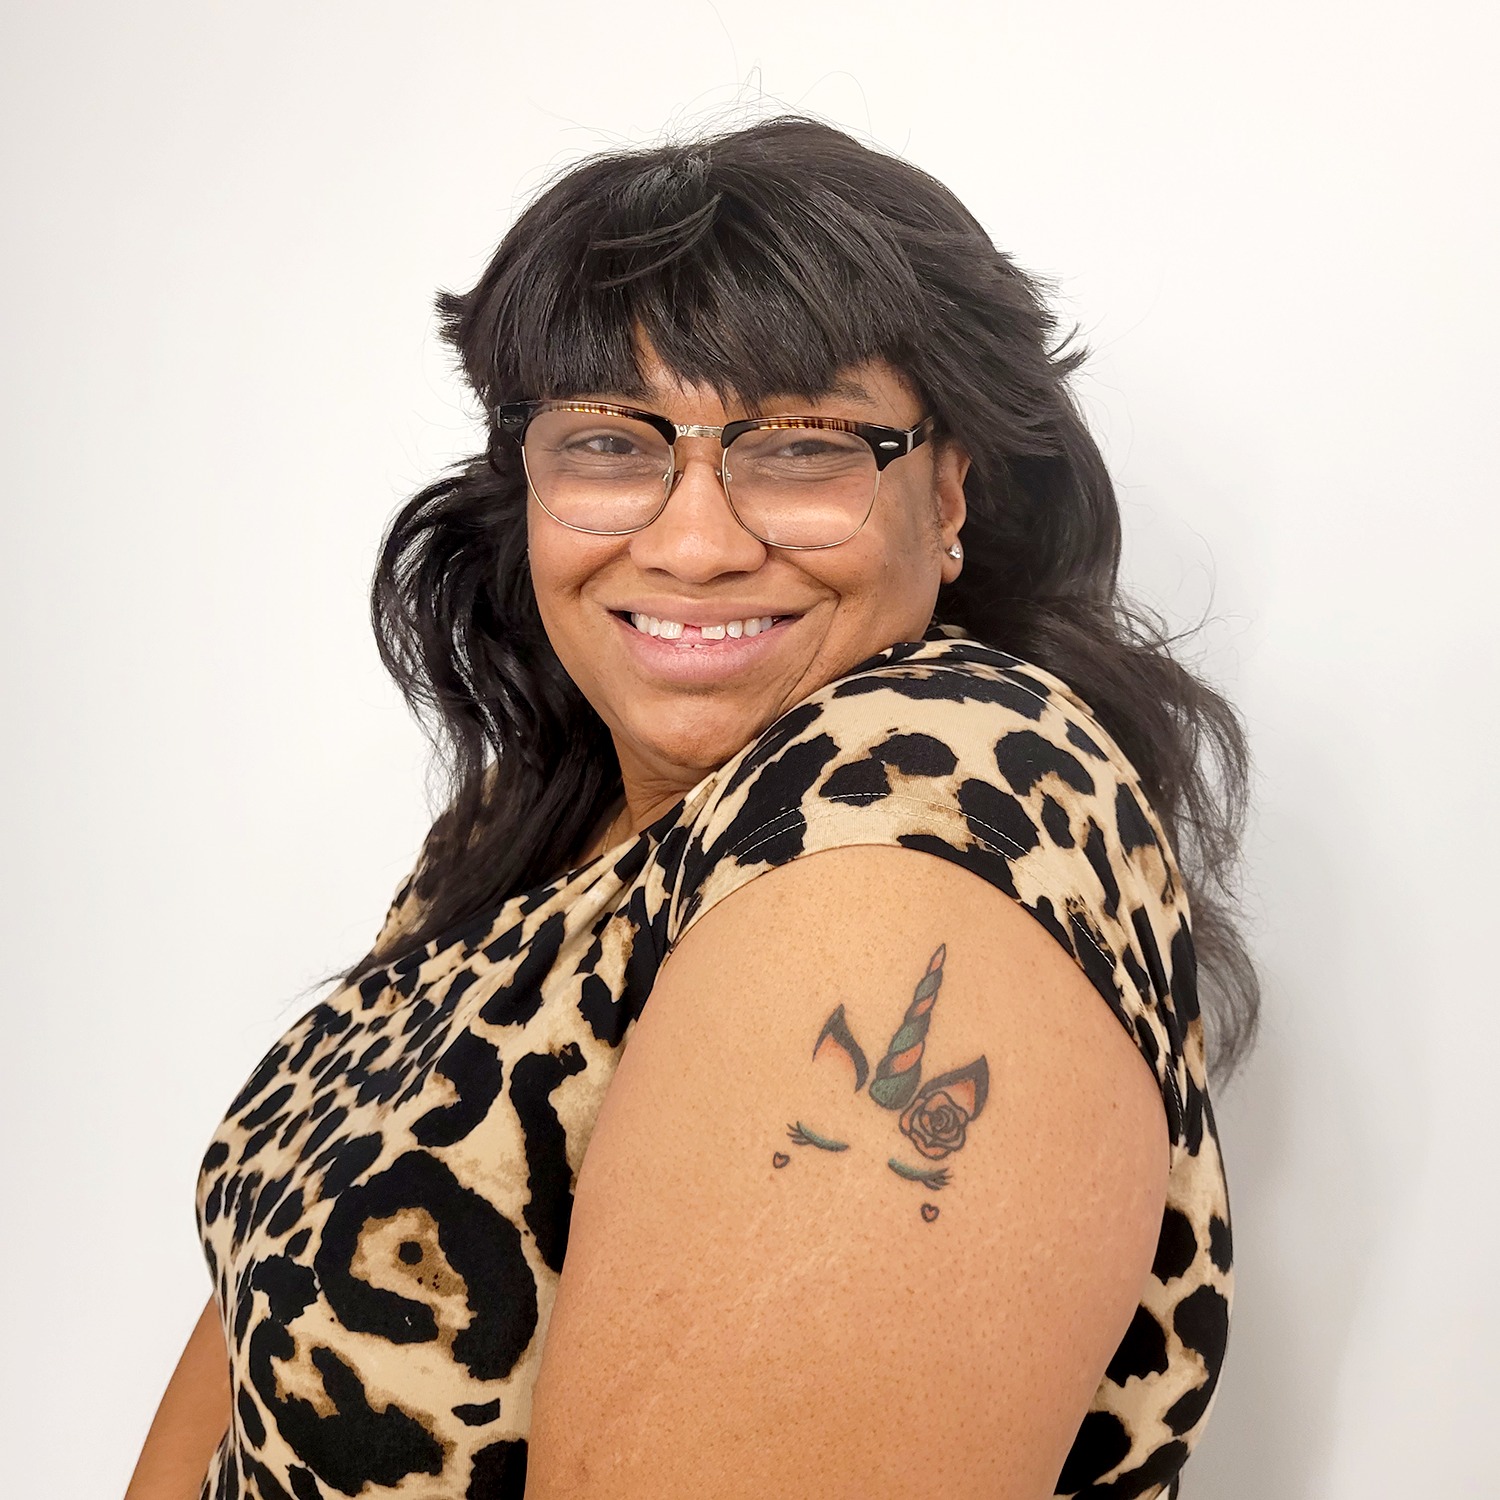 This Portlander Gives Postmastectomy Tattoos to Breast Cancer Survivors |  Portland Monthly